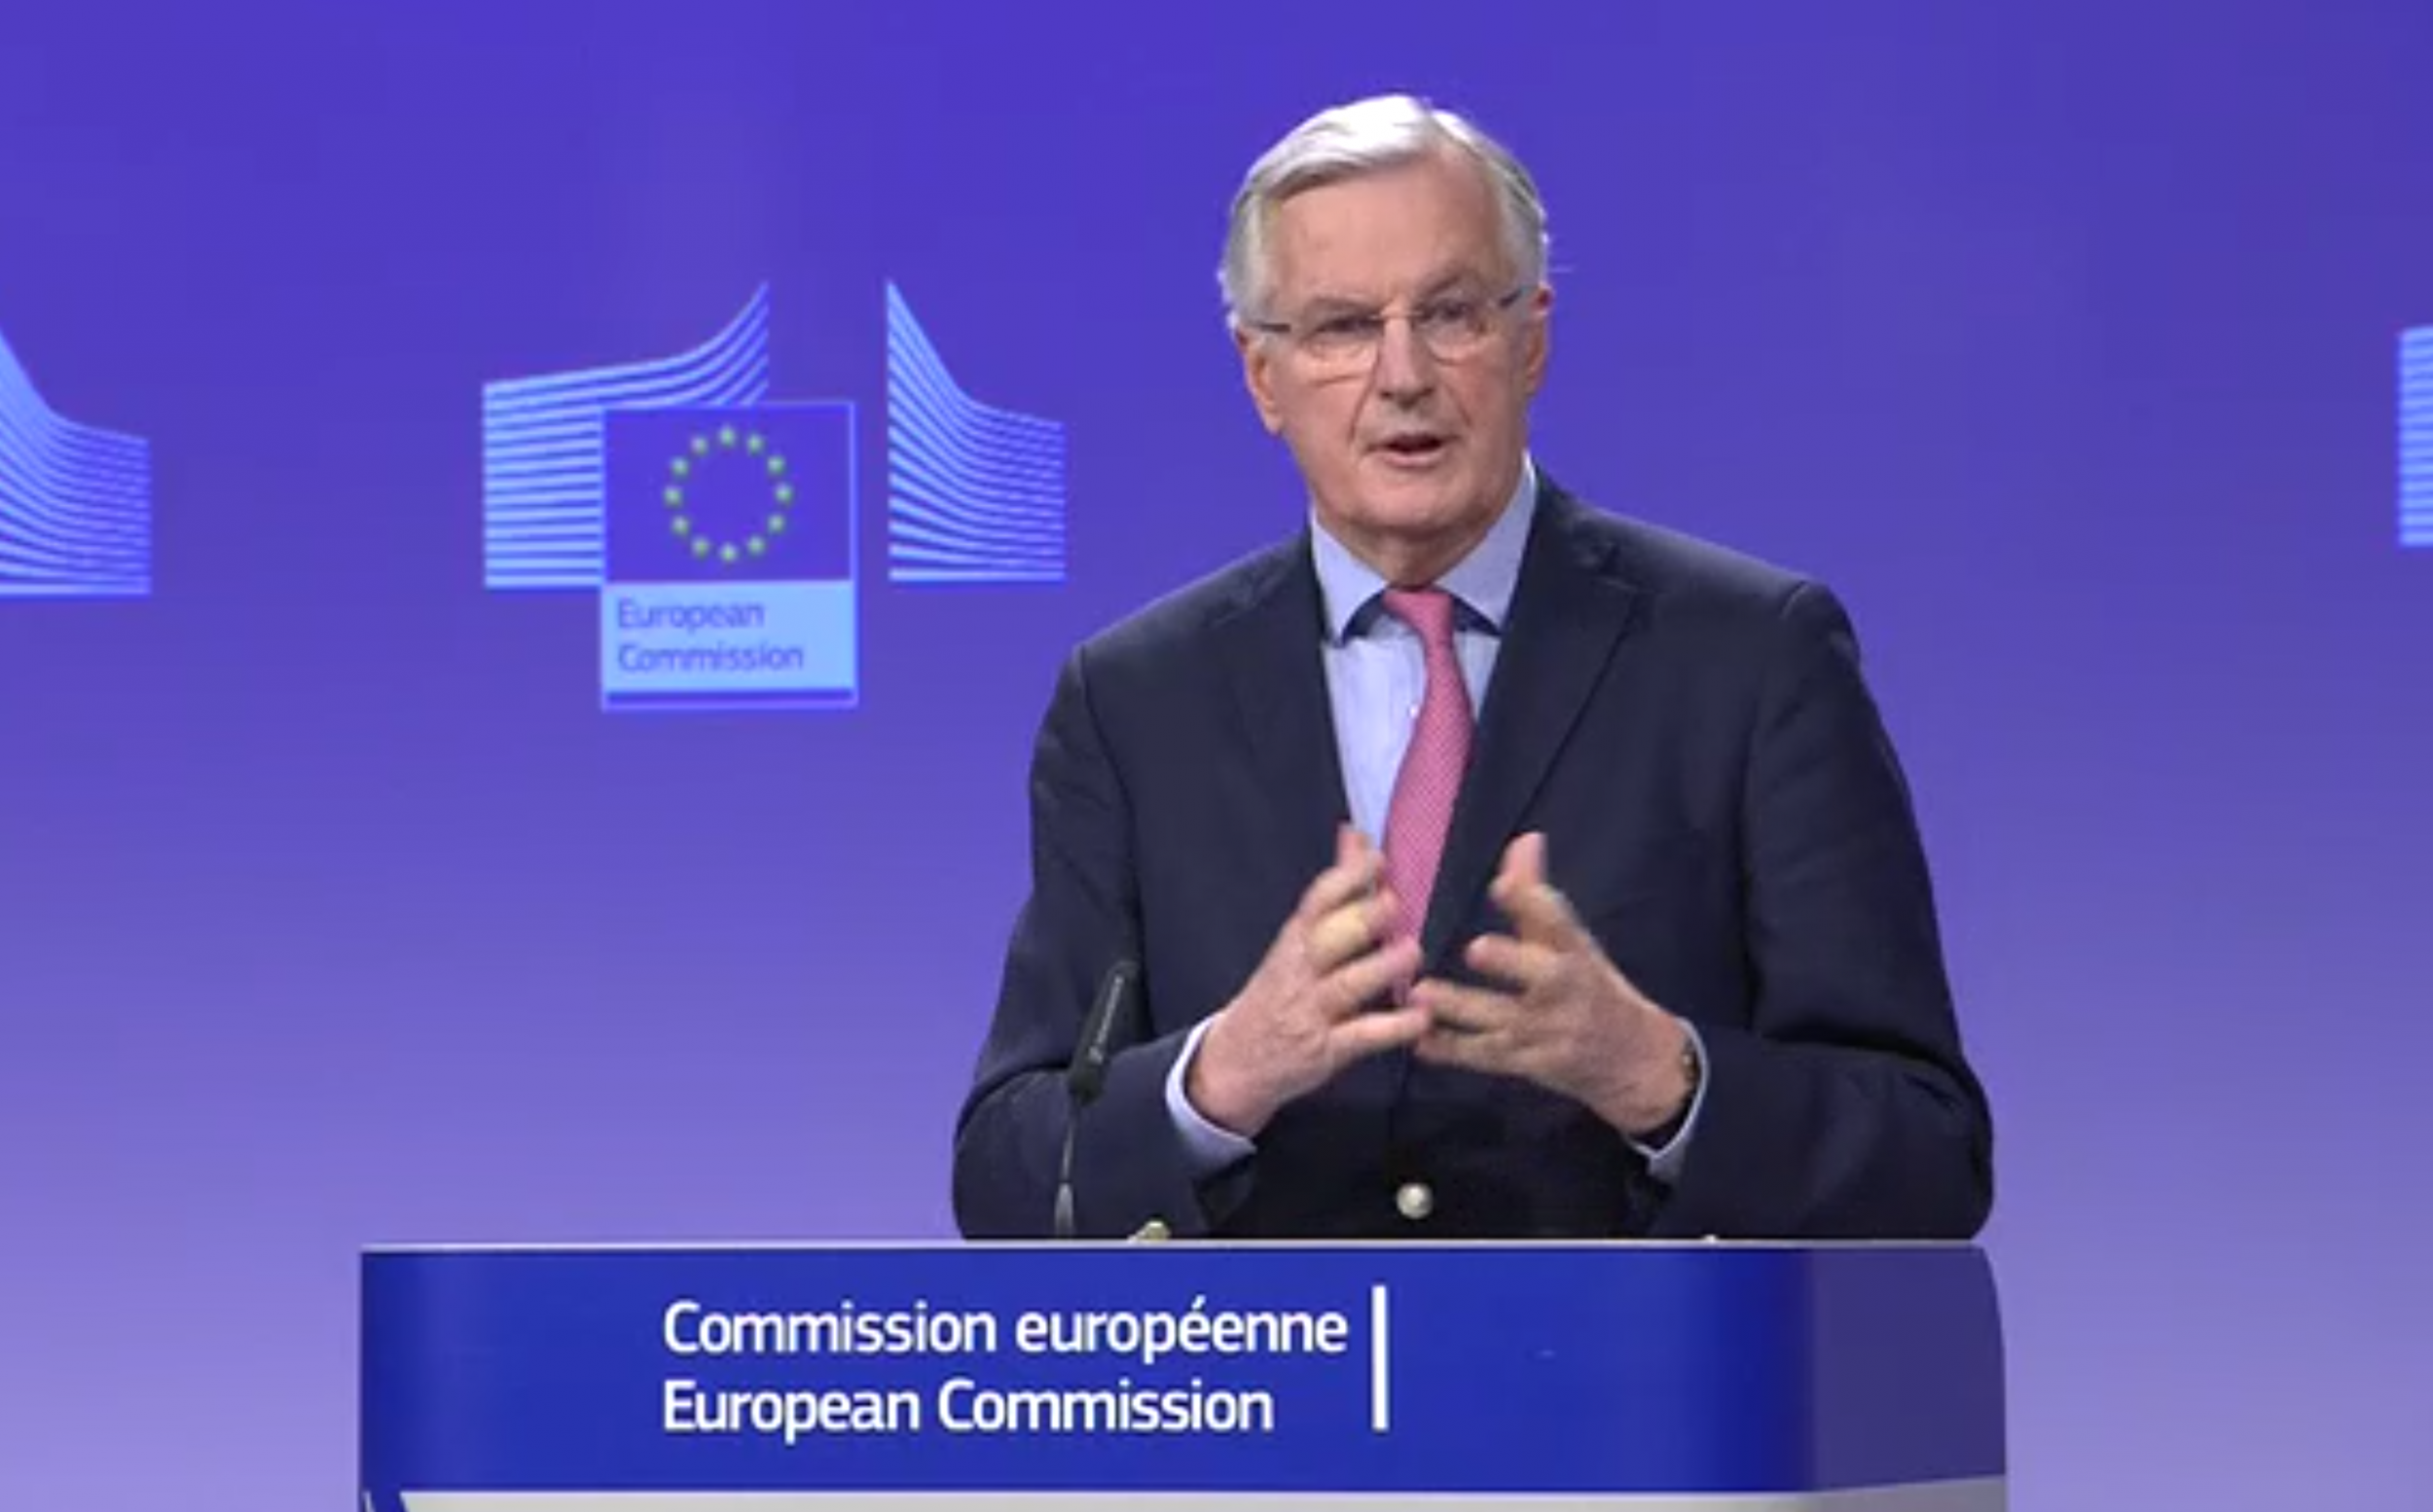 Michel Barnier has said the transition should end on 31 December 2020